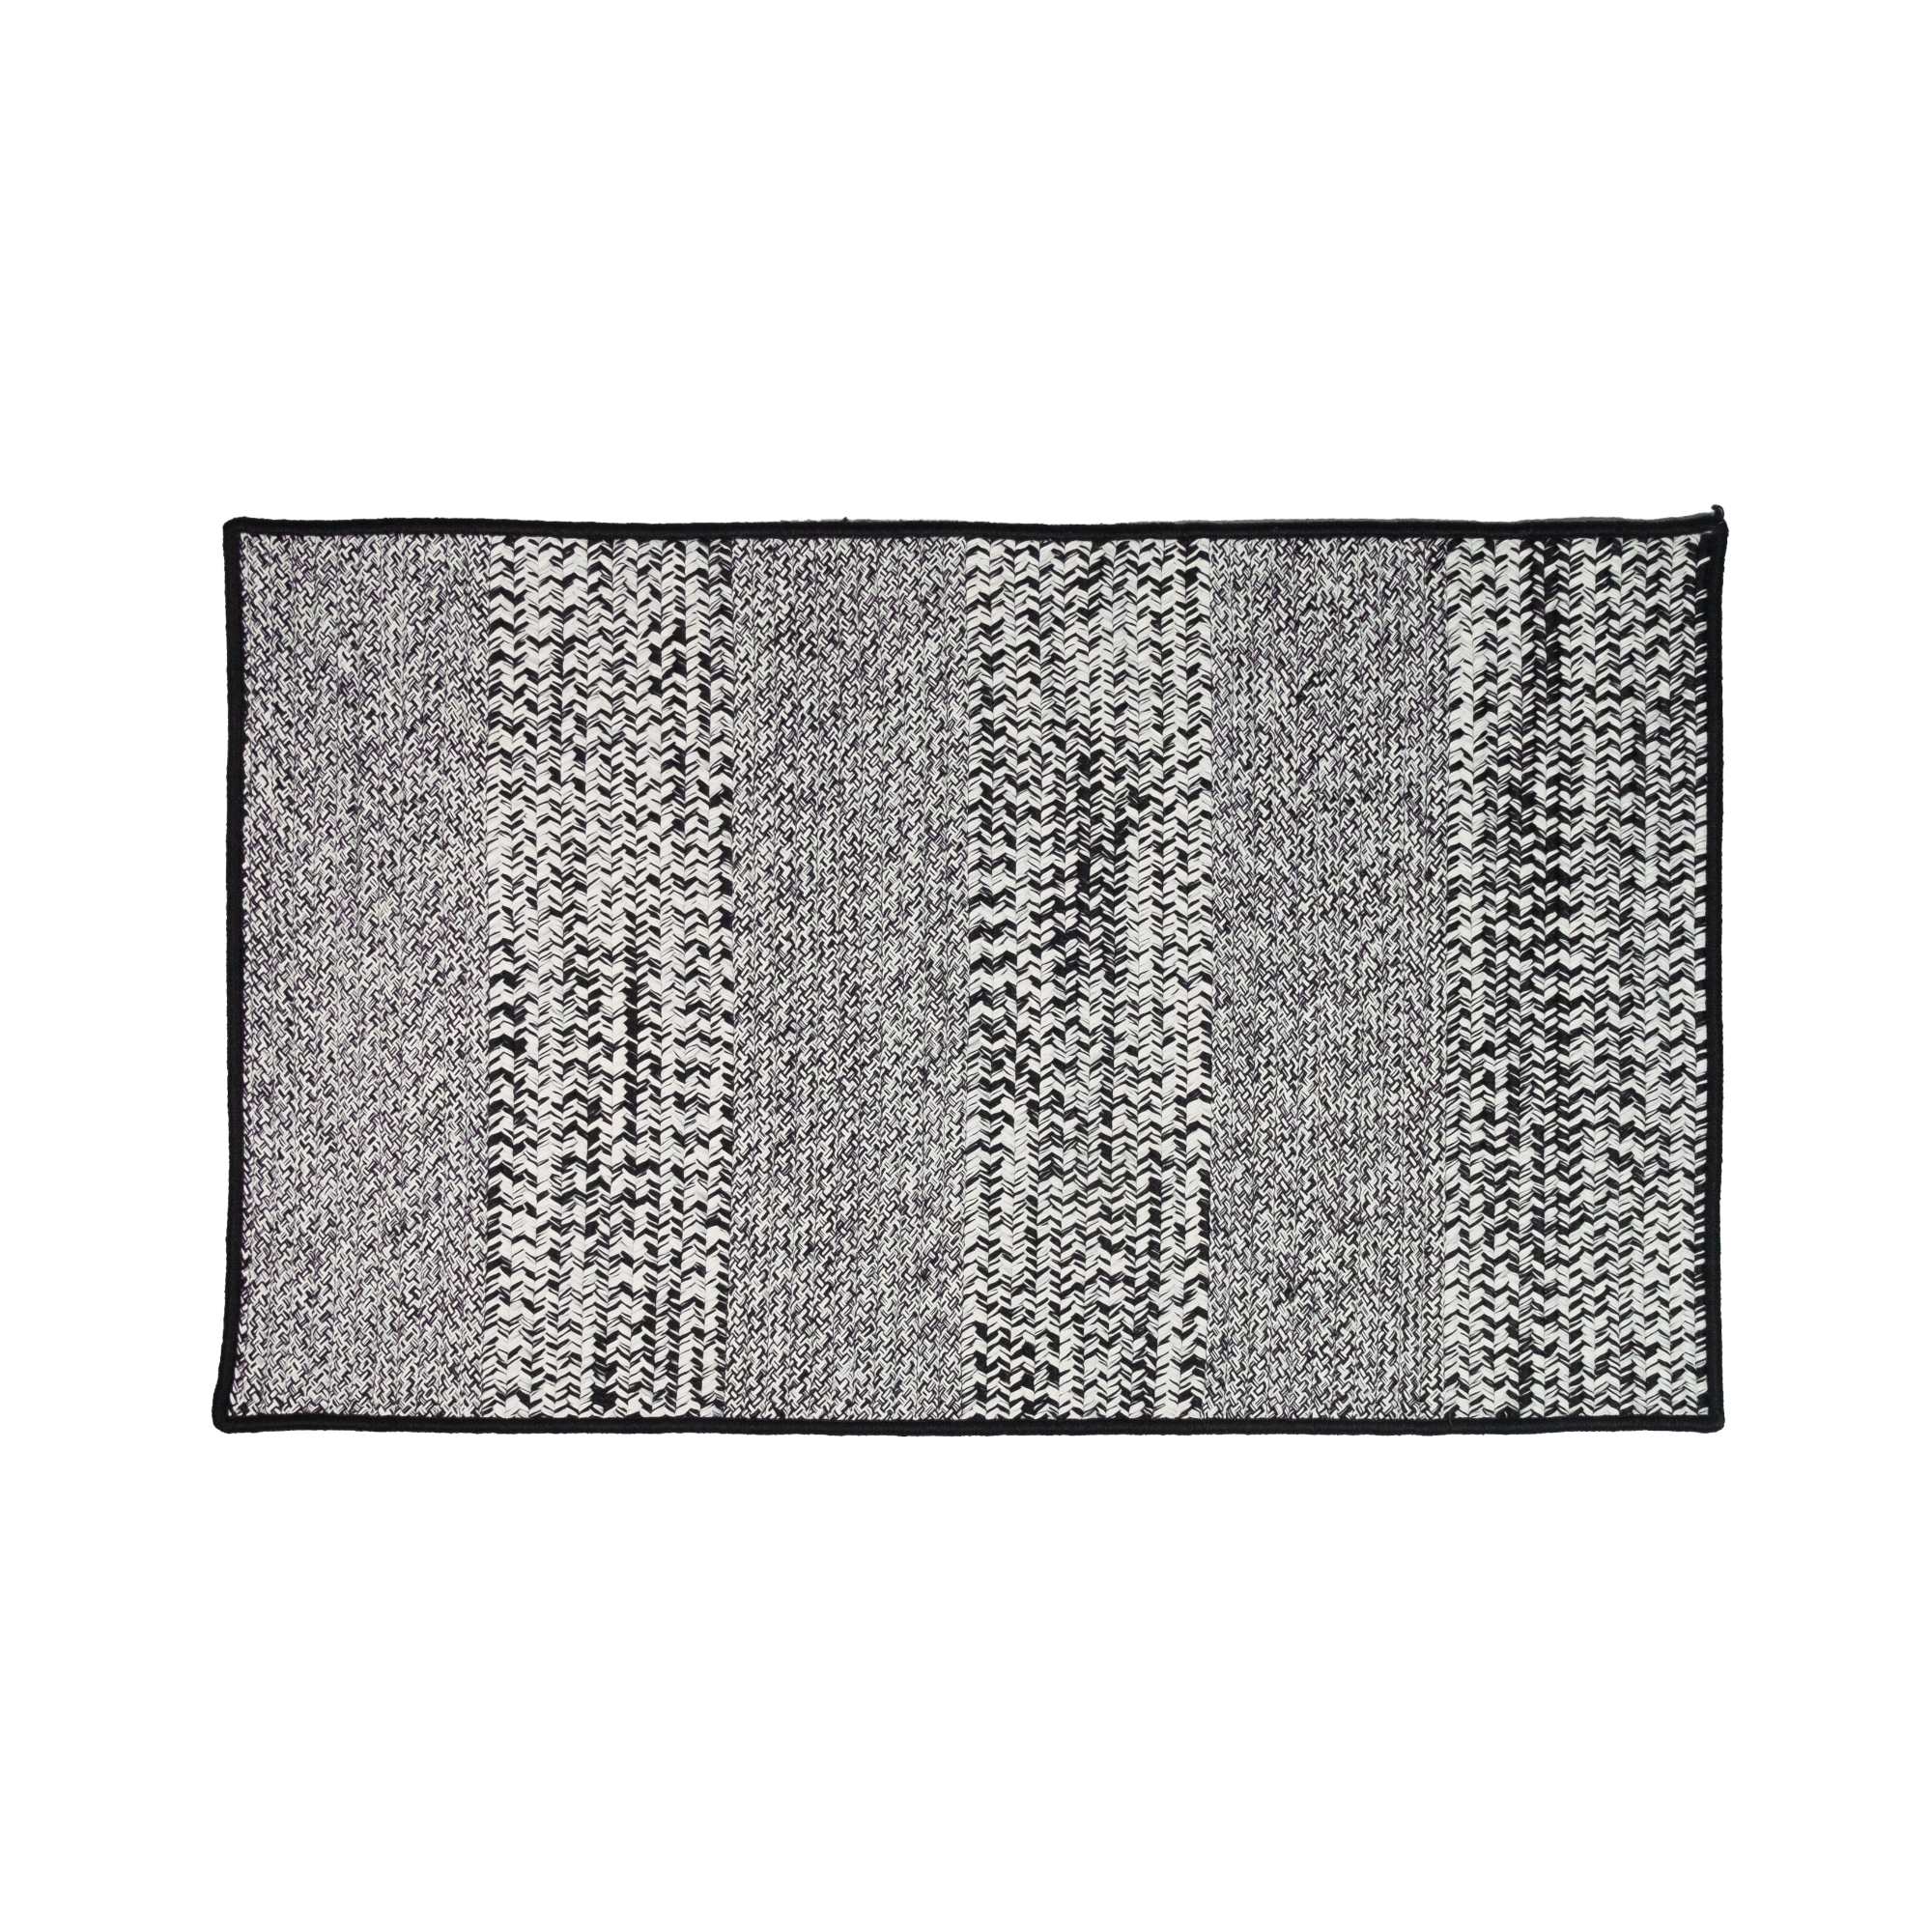 Colonial Mills Black and Off White Tweed Textured Handcrafted Reversible Door Mat 35" x 54"